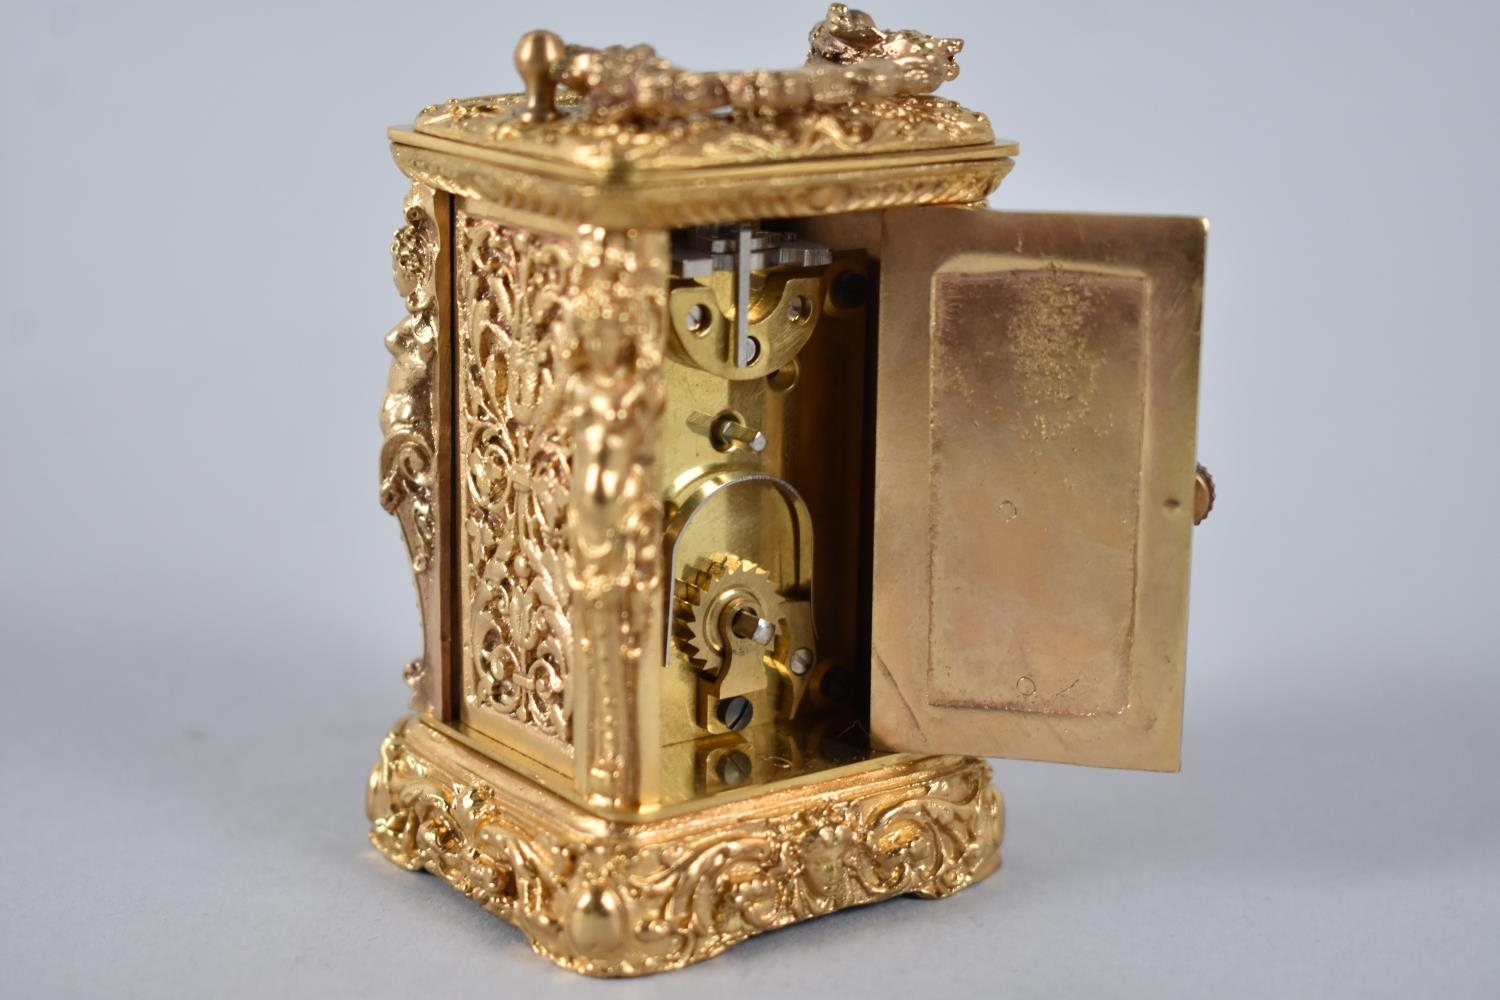 A Reproduction Ornate Gilt Brass Miniature Carriage Clock with White Enamelled Dial, Complete with - Image 2 of 2